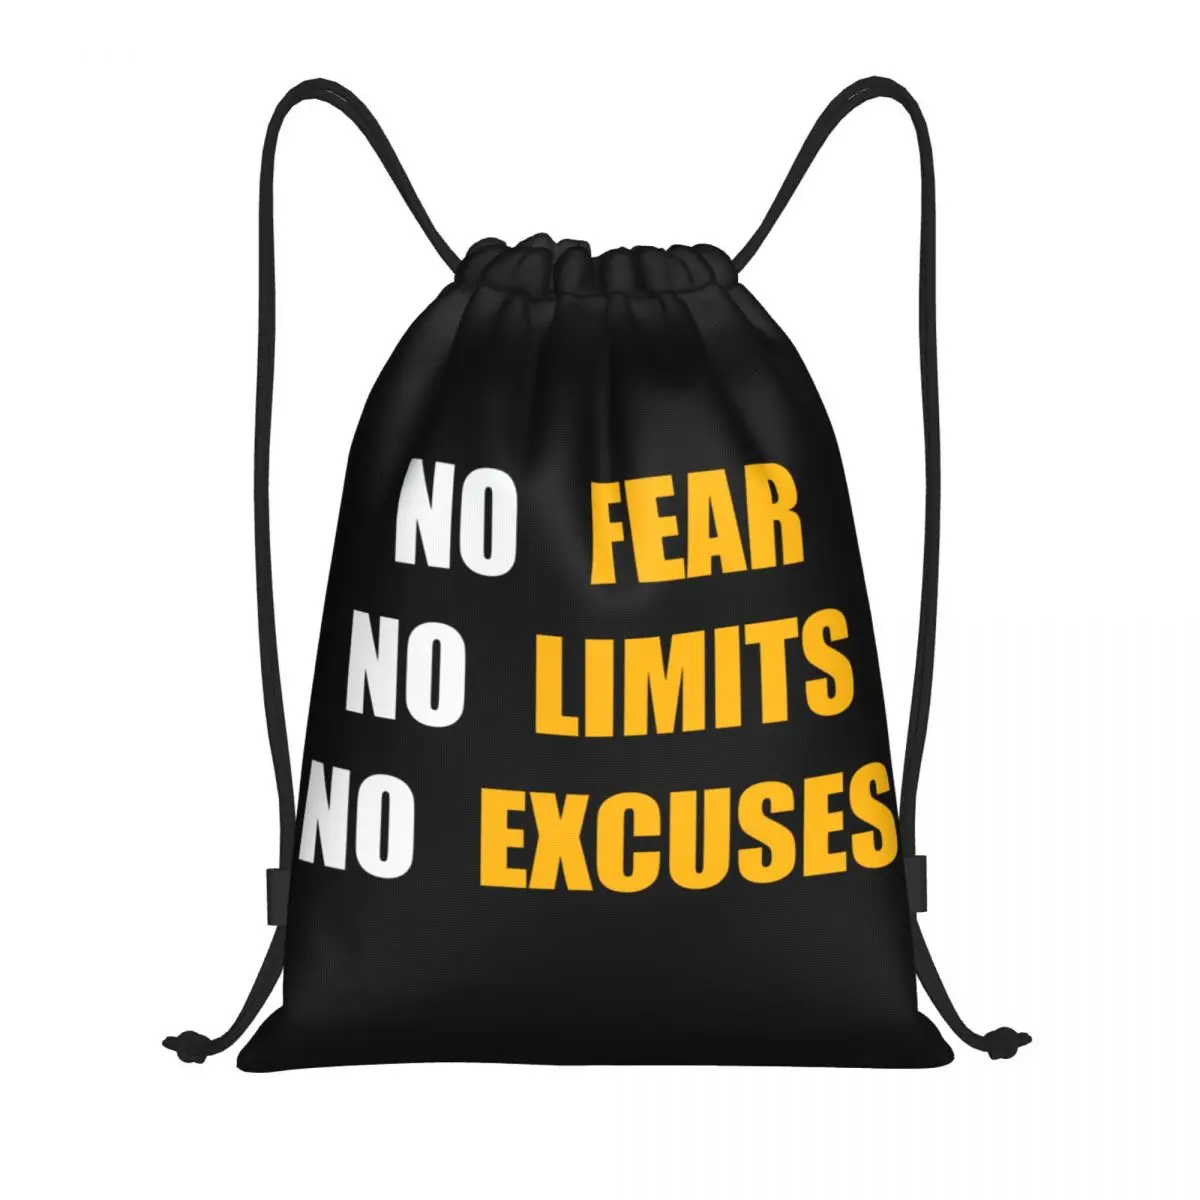 

Custom No Fear No Limits No Excuses Drawstring Bags Women Men Lightweight Sports Gym Storage Backpack